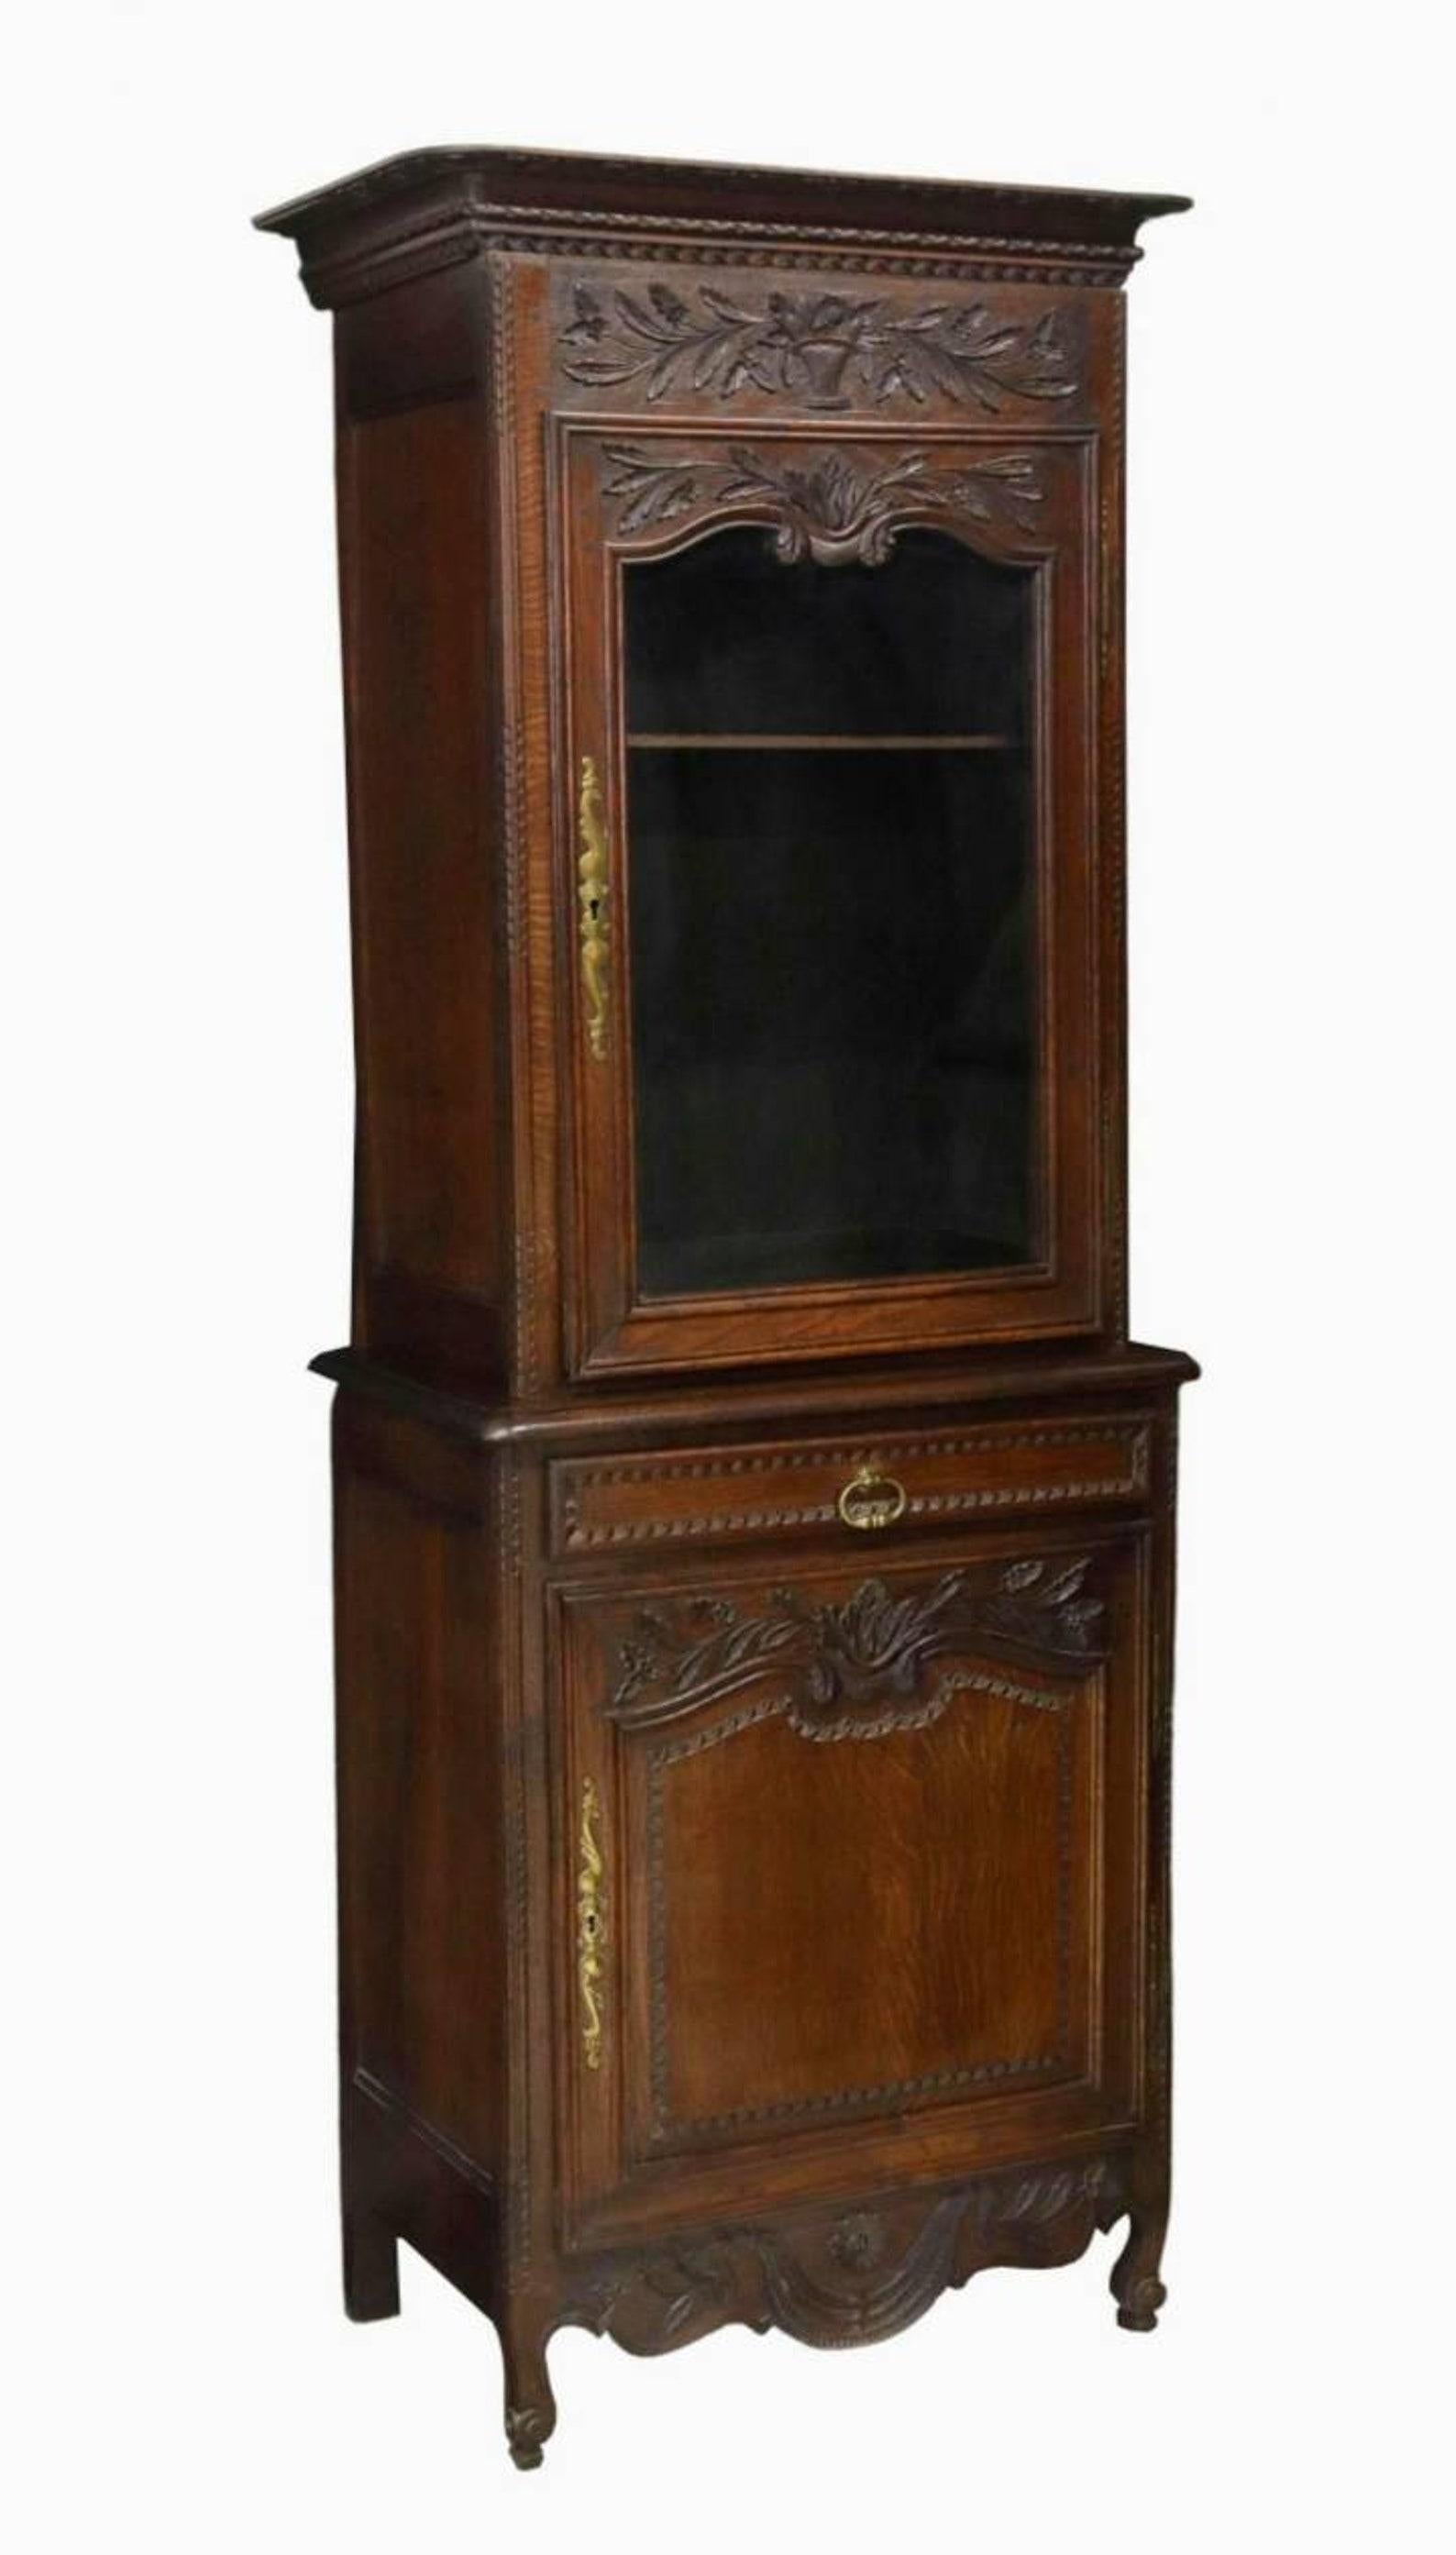 A French Louis XV style carved oak vitrine display cabinet with warm beautifully aged patina.

Hand-crafted in France in the first half of the 19th century, well made high-quality craftsmanship and construction throughout, elaborately carved and